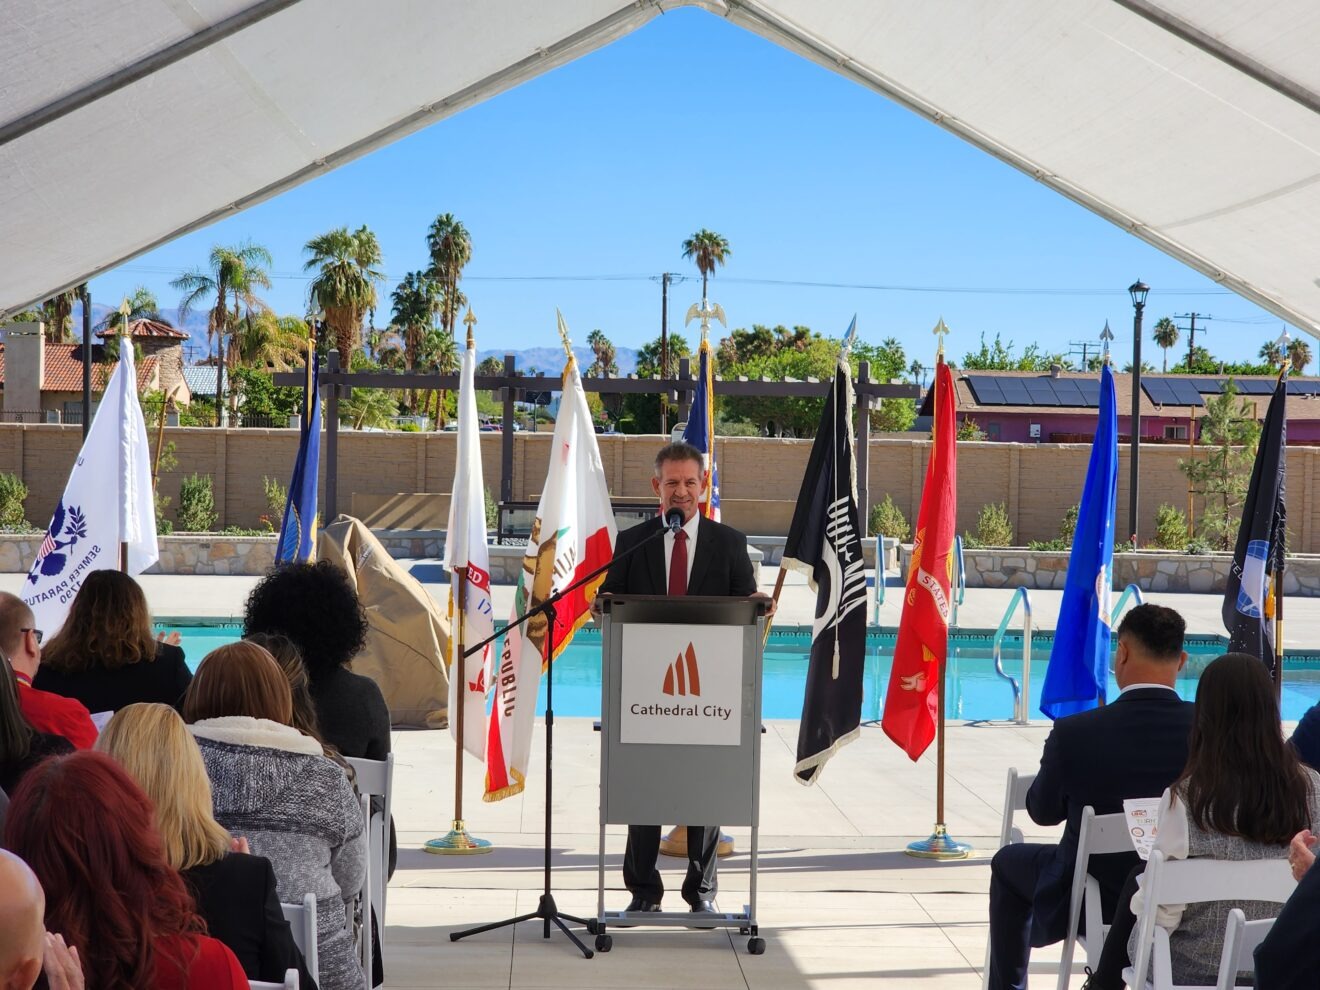 Veterans Village Celebrates Grand Opening Ceremony in Cathedral City